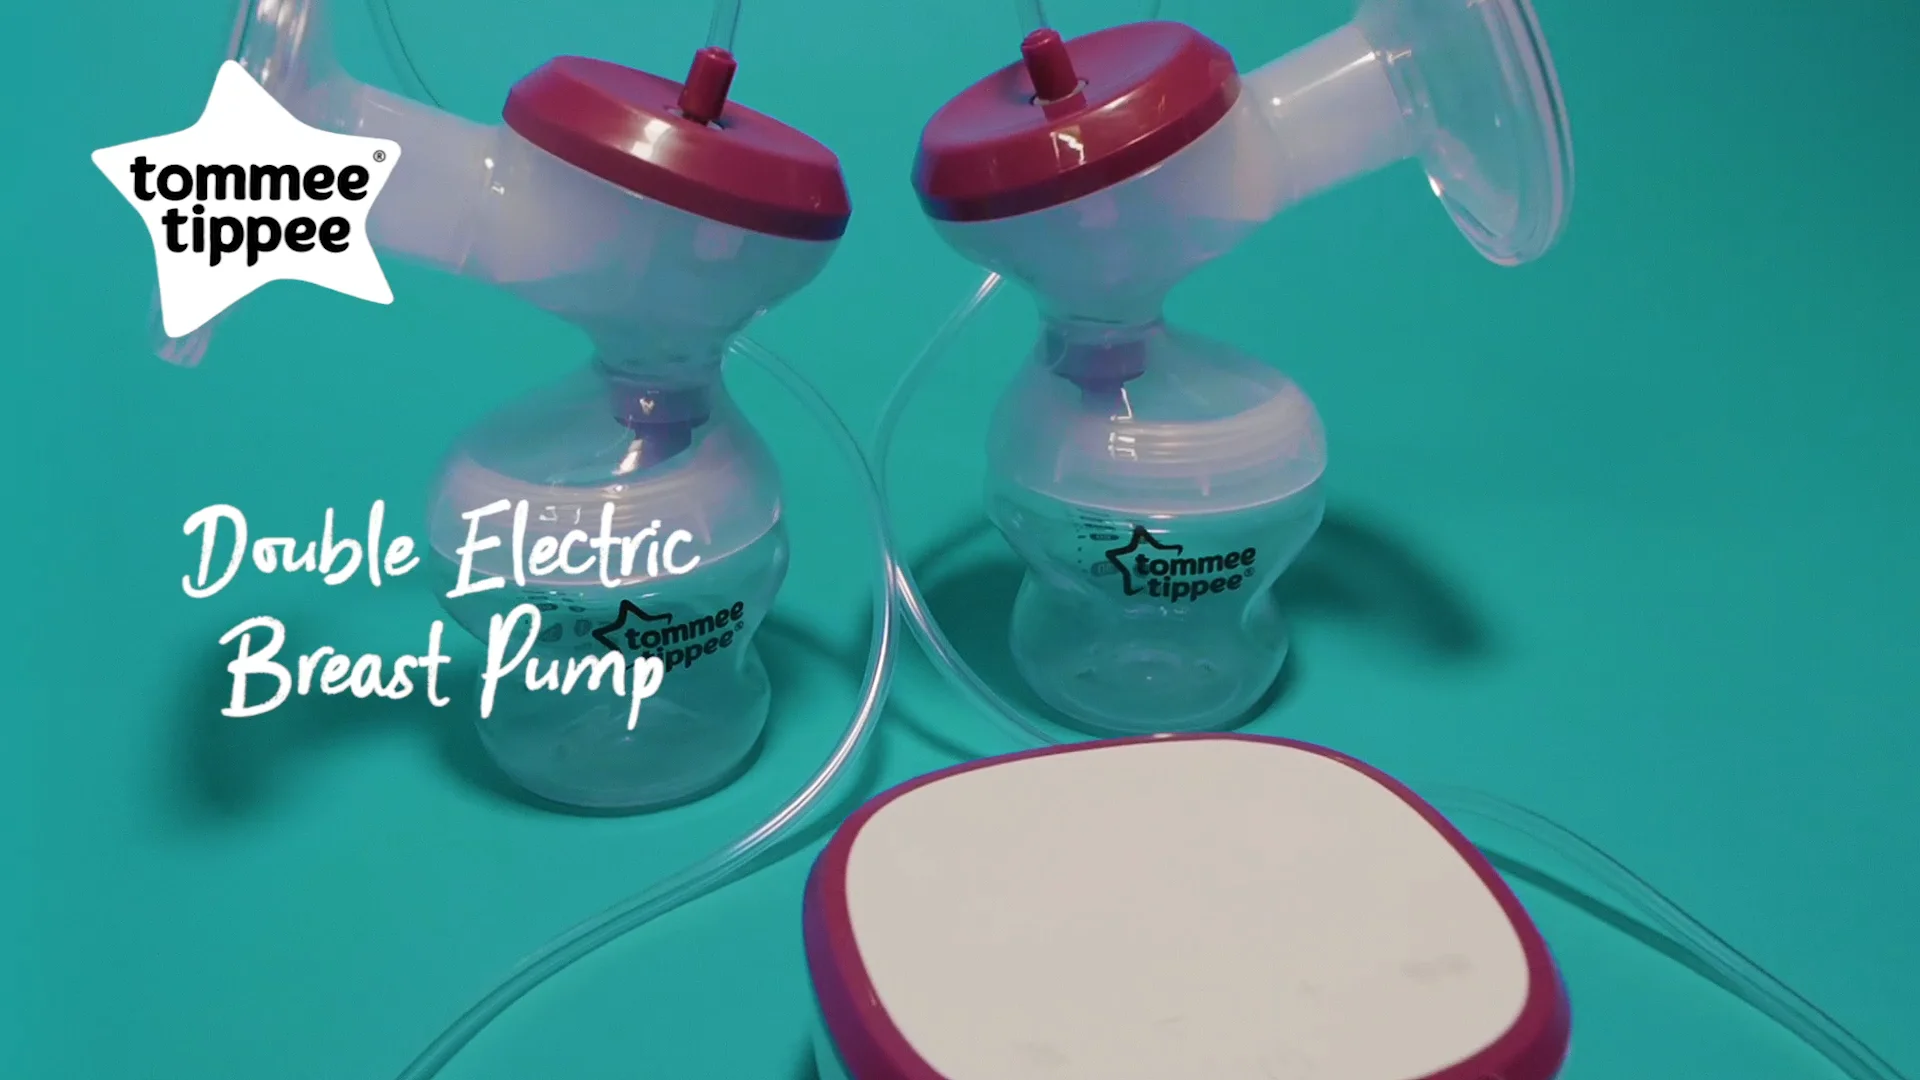 Tommee Tippee - Made for Me Single Electric Breast Pump